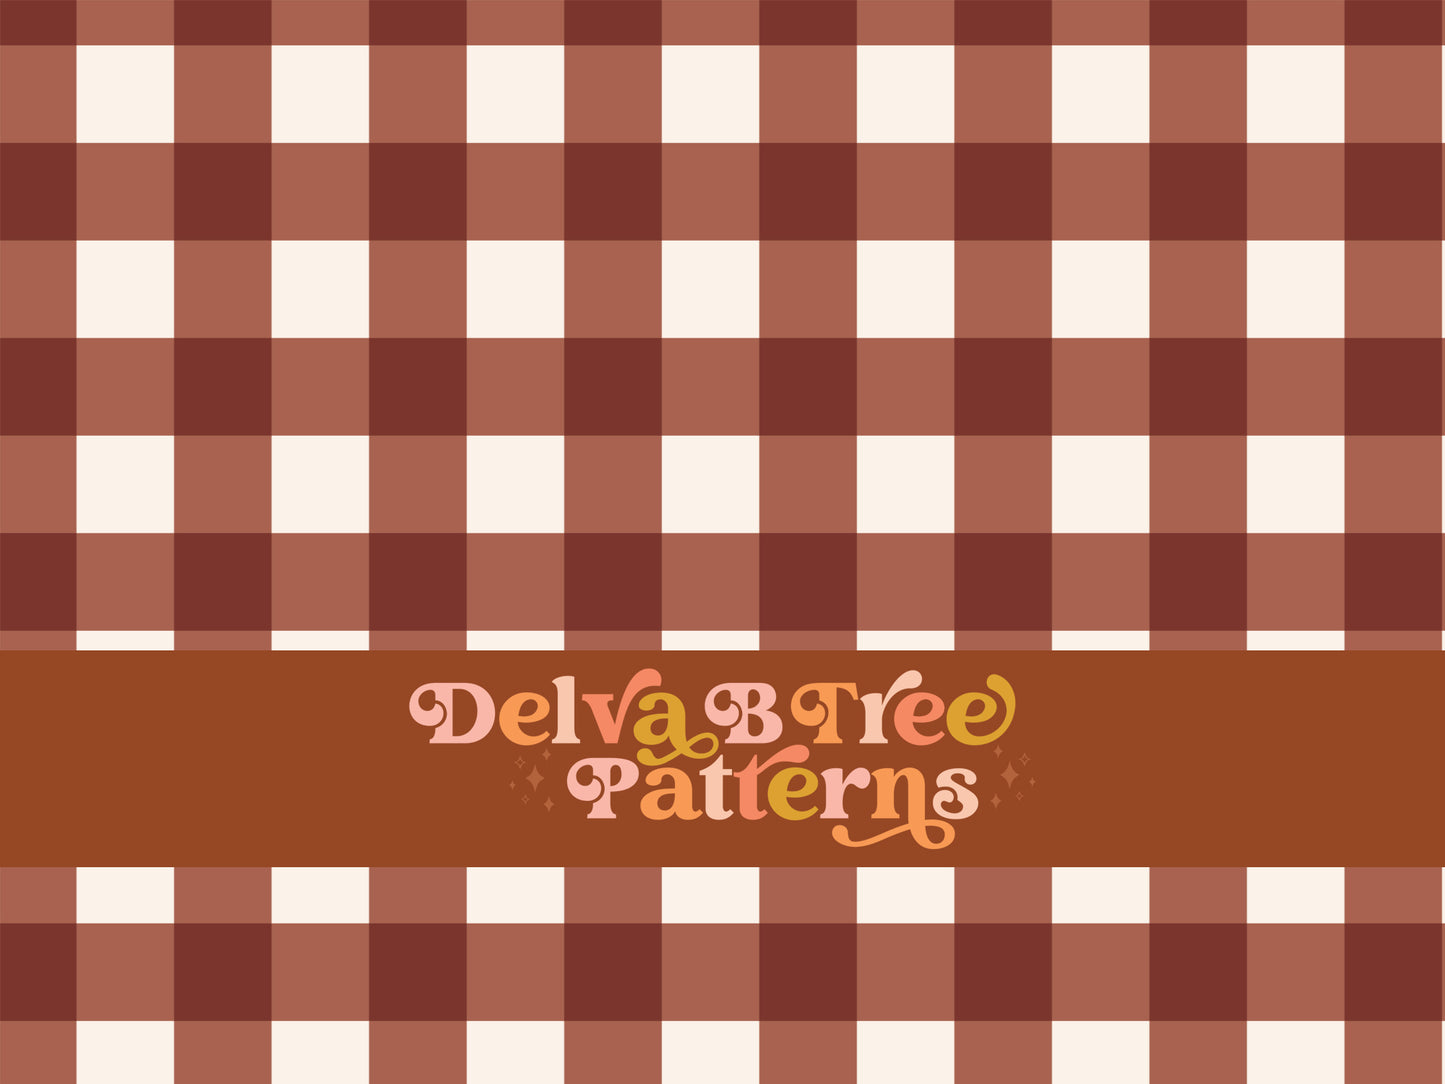 One inch brown and white gingham seamless file for fabric printing. Classic Buffalo Checked Repeat Pattern for textiles, polymailers, baby boy lovey blankets, nursery crib bedding, kids clothing, girls hair accessories, home decor accents, pet products.